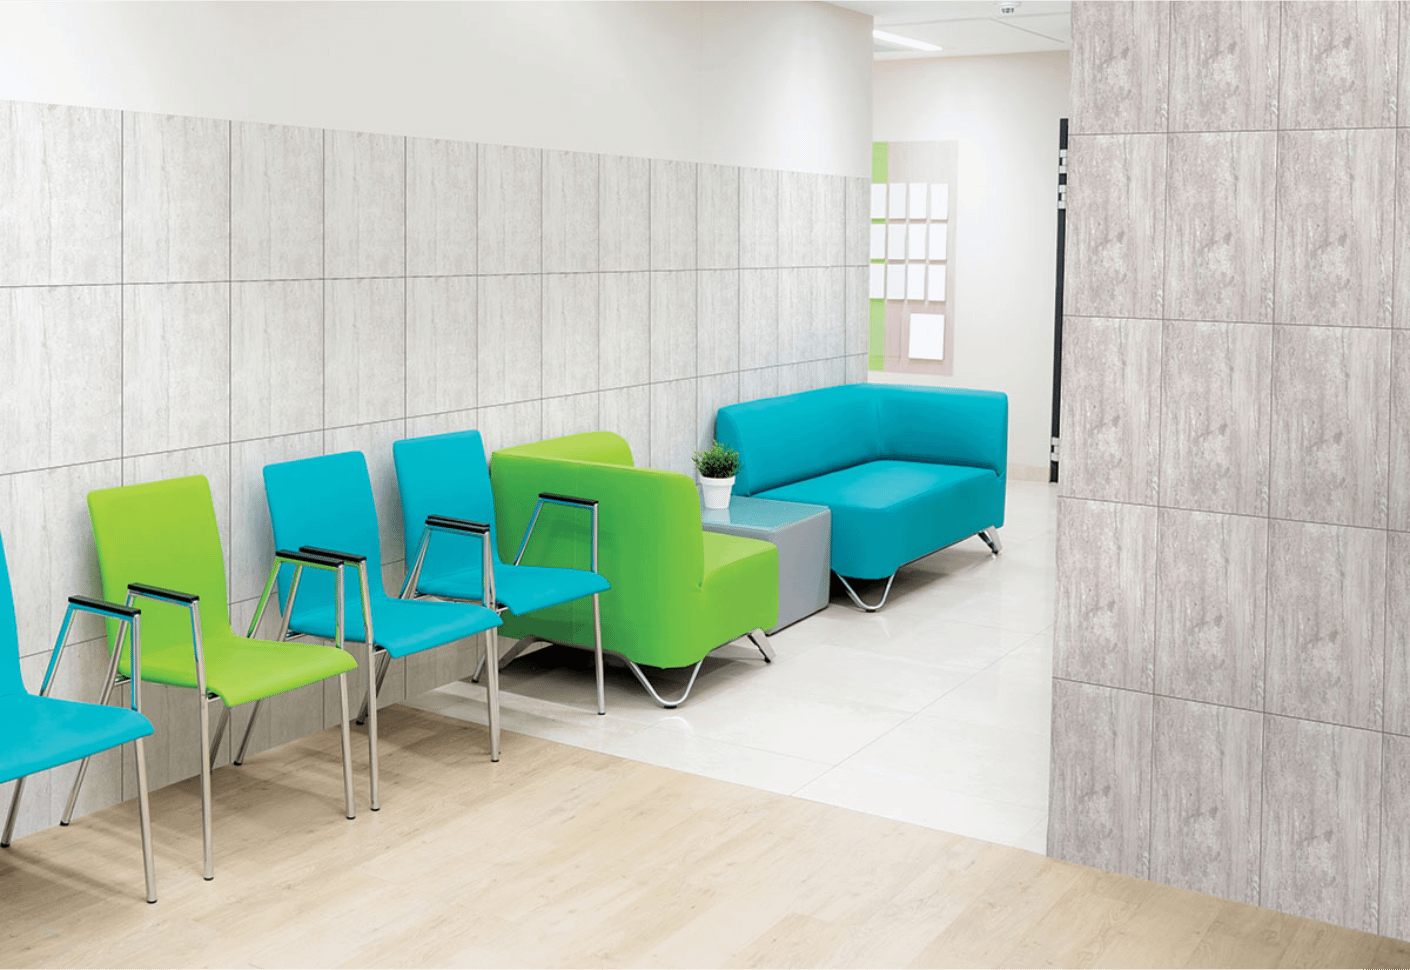 germ free tiles for hospital space